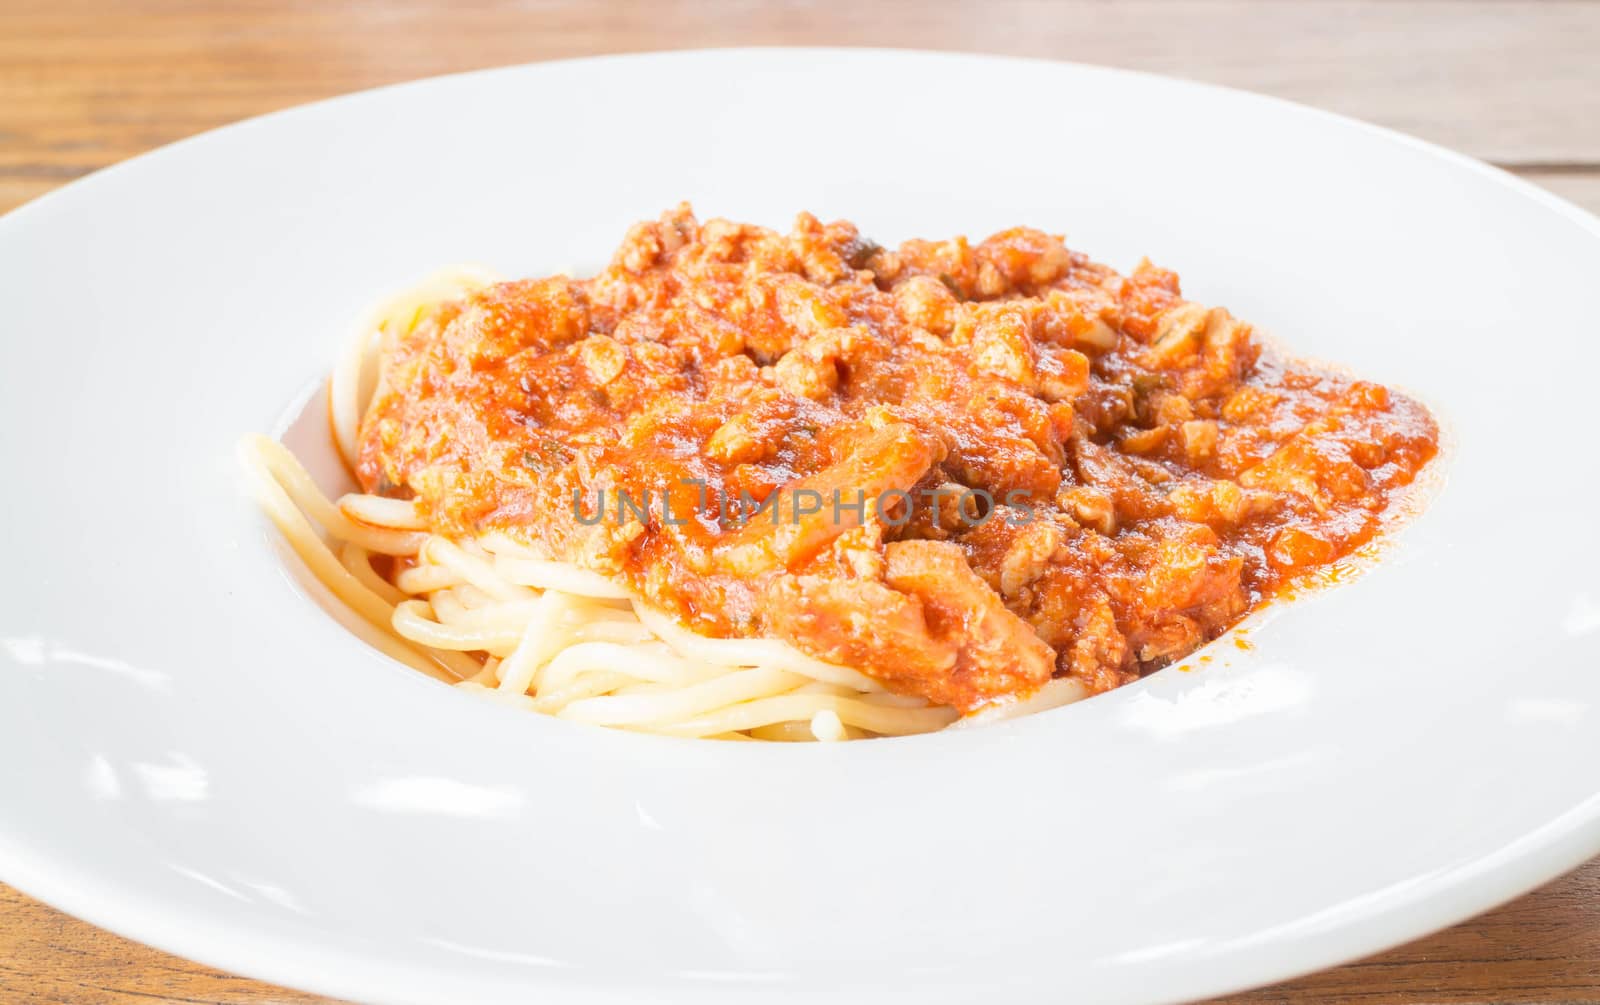 Spaghetti and pork with tomato sauce by punsayaporn